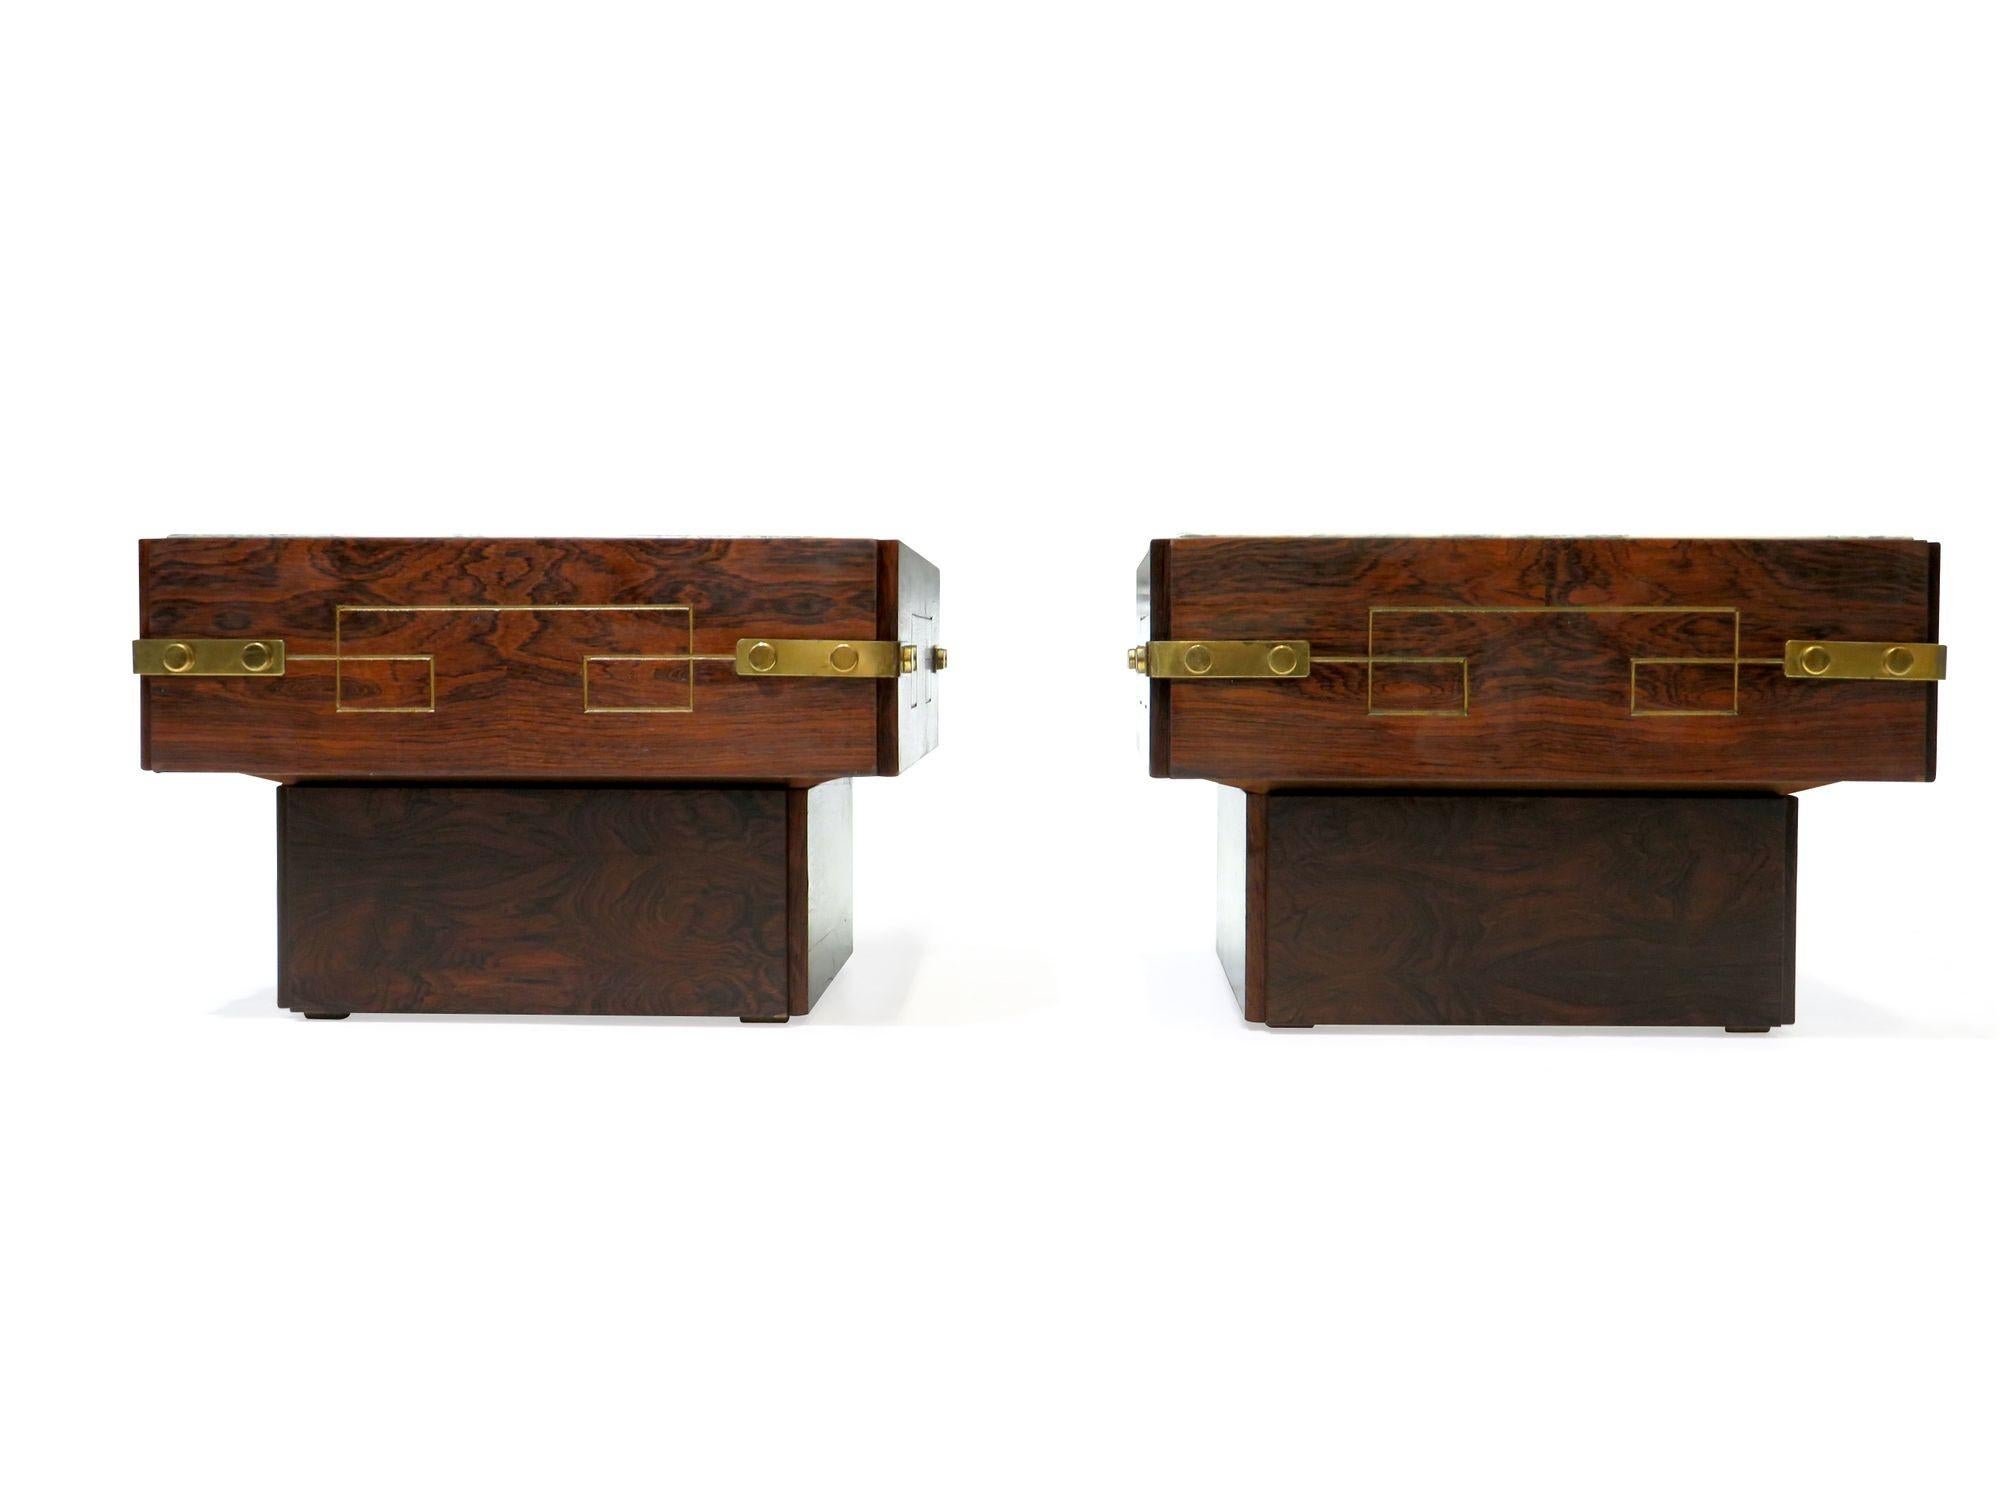 1958 Brazilian Rosewood Side Tables with Marble and Brass In Good Condition For Sale In Oakland, CA